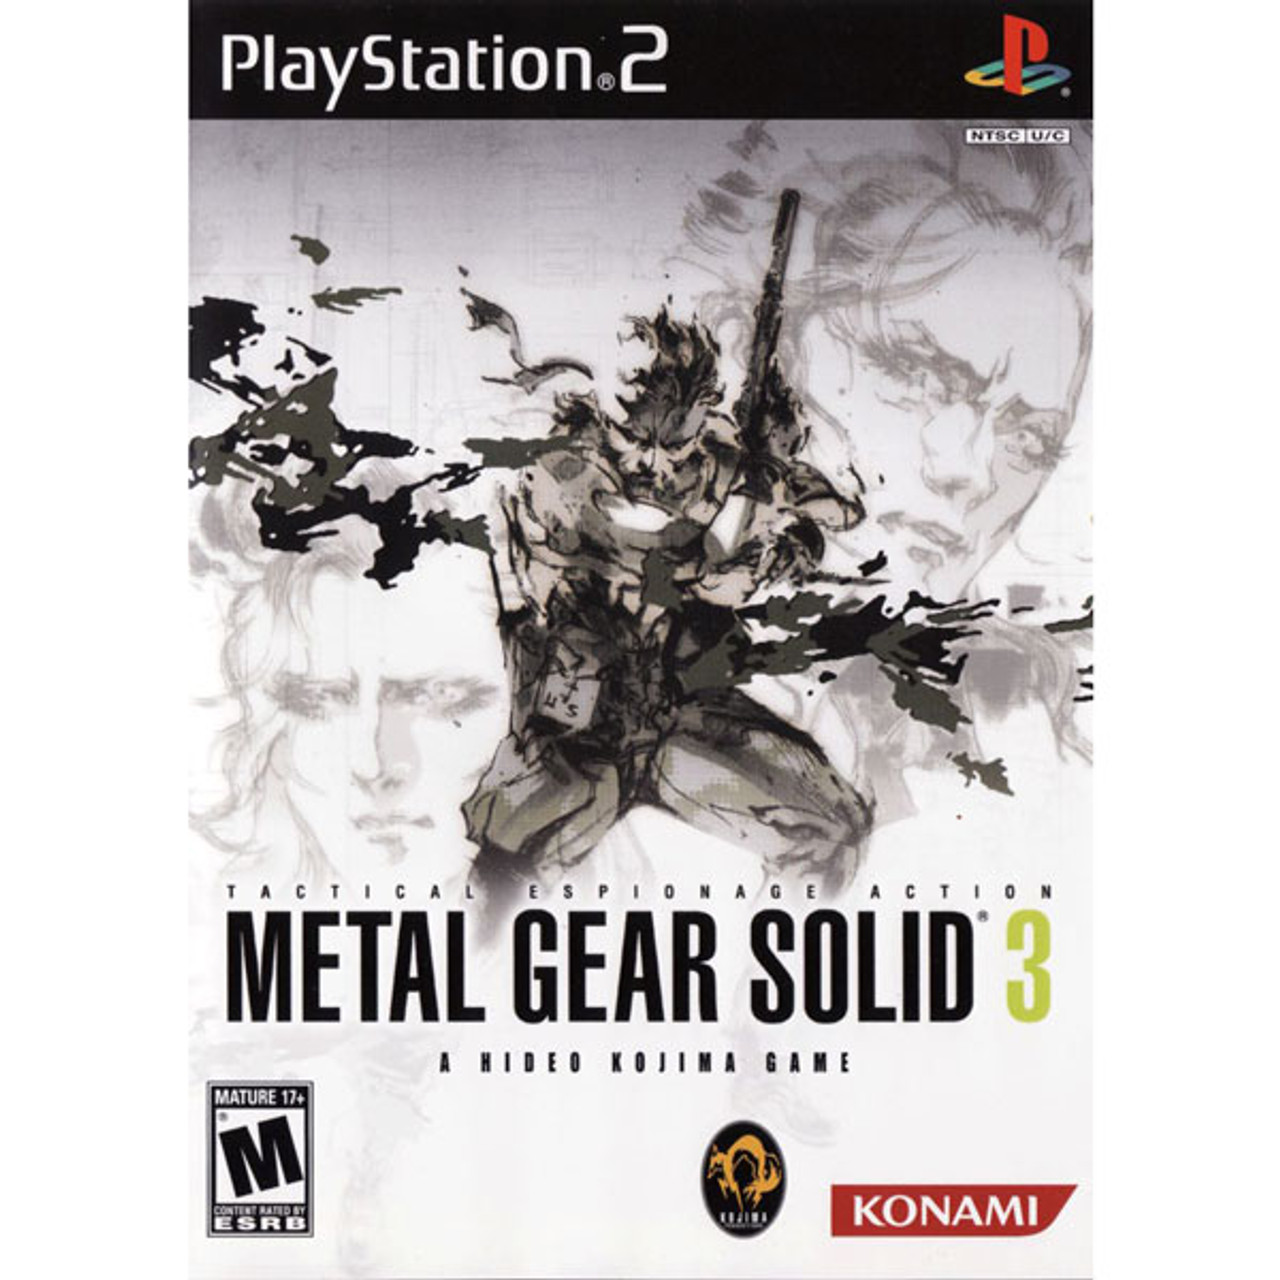 Metal Gear Solid 3 Subsistence PS2 Game For Sale